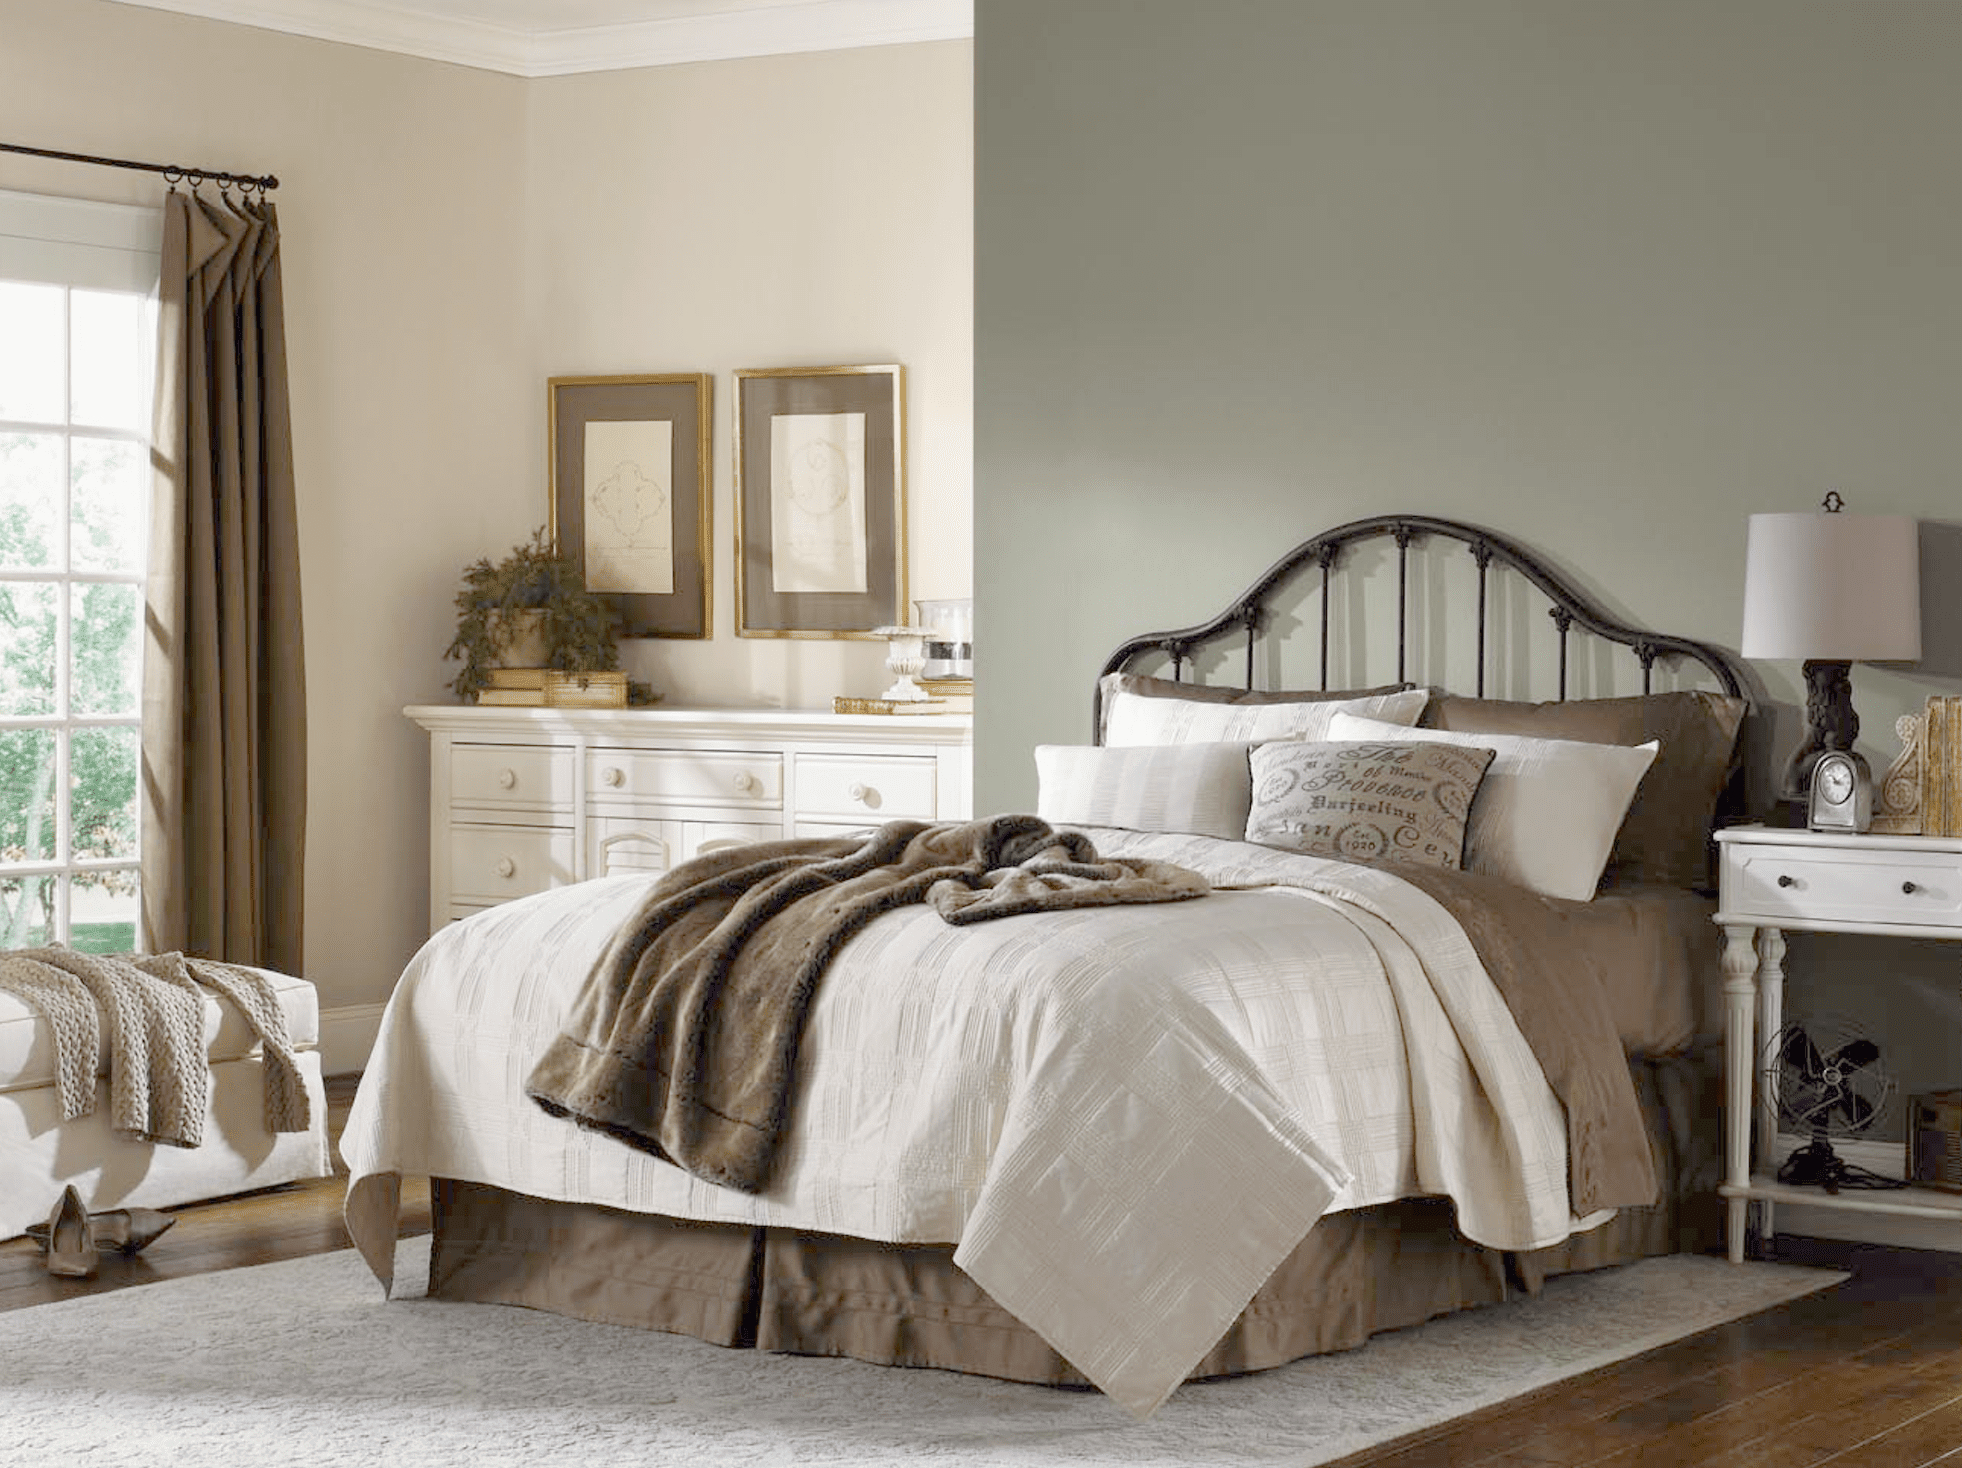 8 Relaxing Sherwin Williams Paint Colors For Bedrooms regarding sizing 1962 X 1468